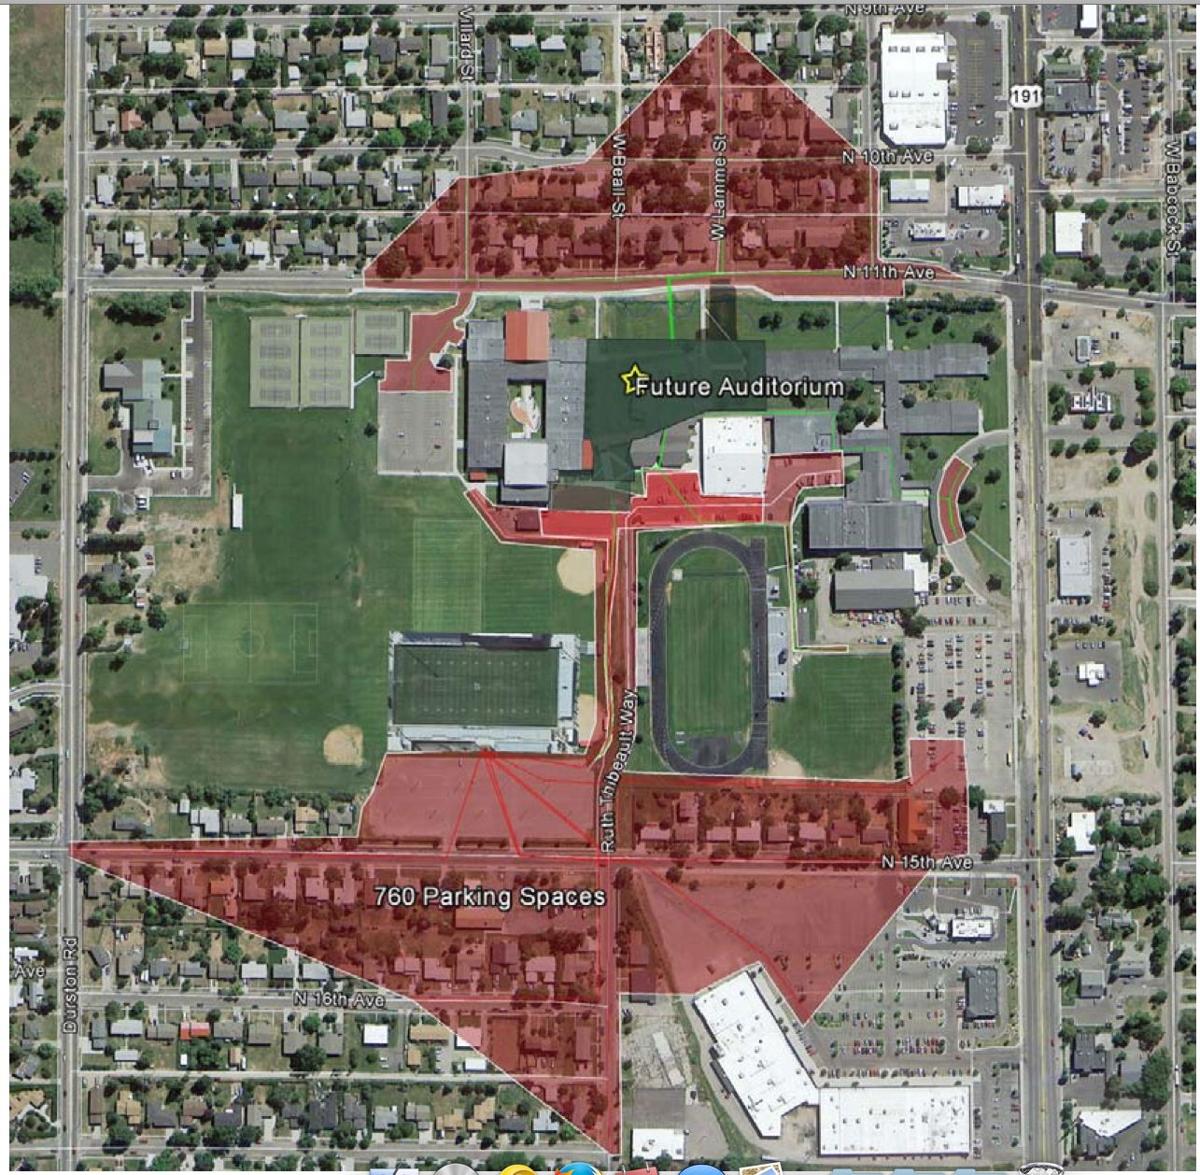 Bozeman High neighbors predict parking woes with new